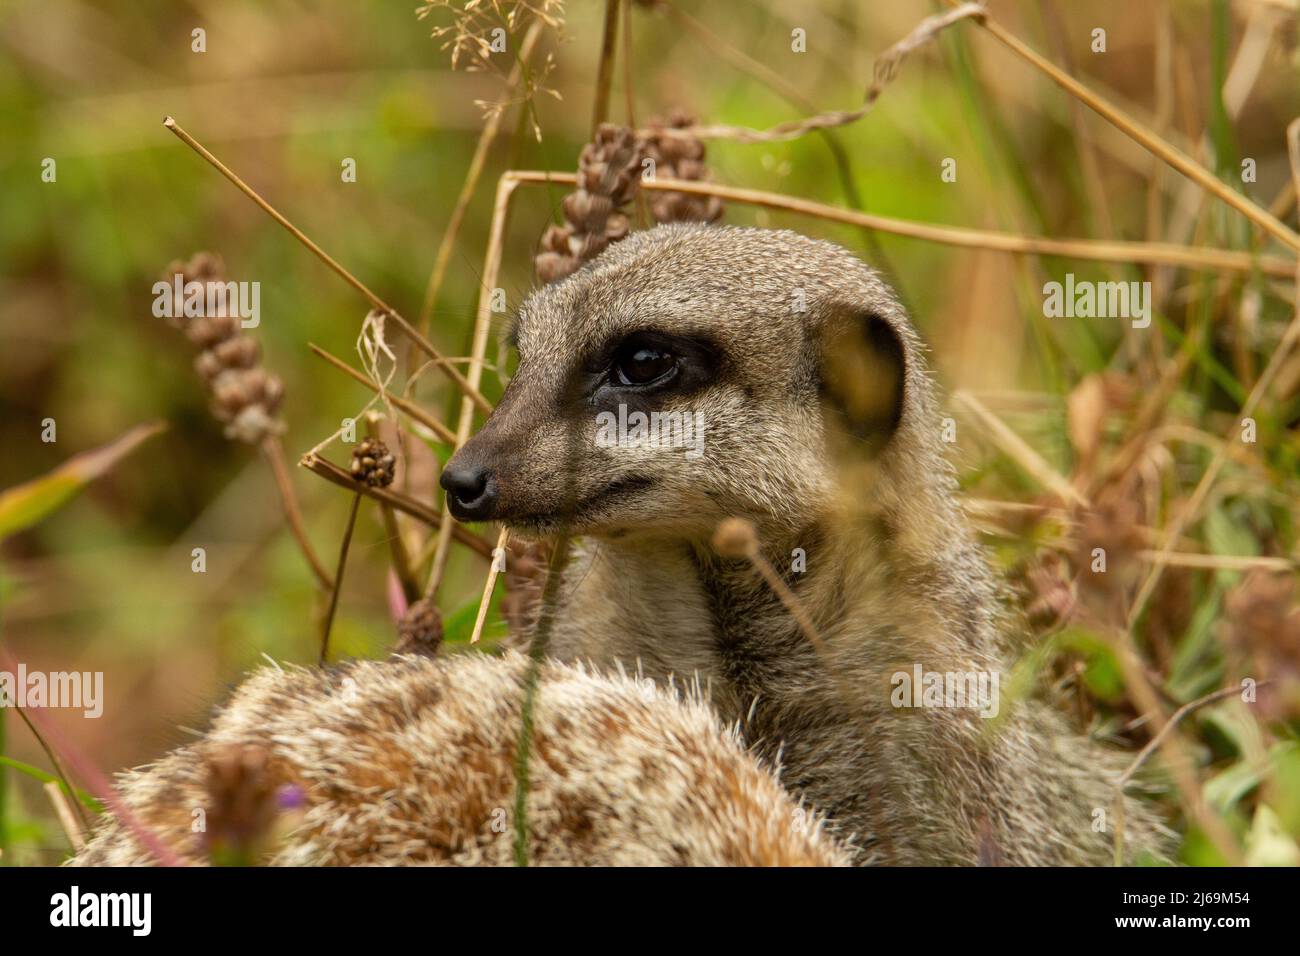 head of a Slender tailed meerkat (Suricata suricatta) with dead grass isolated on a natural background Stock Photo